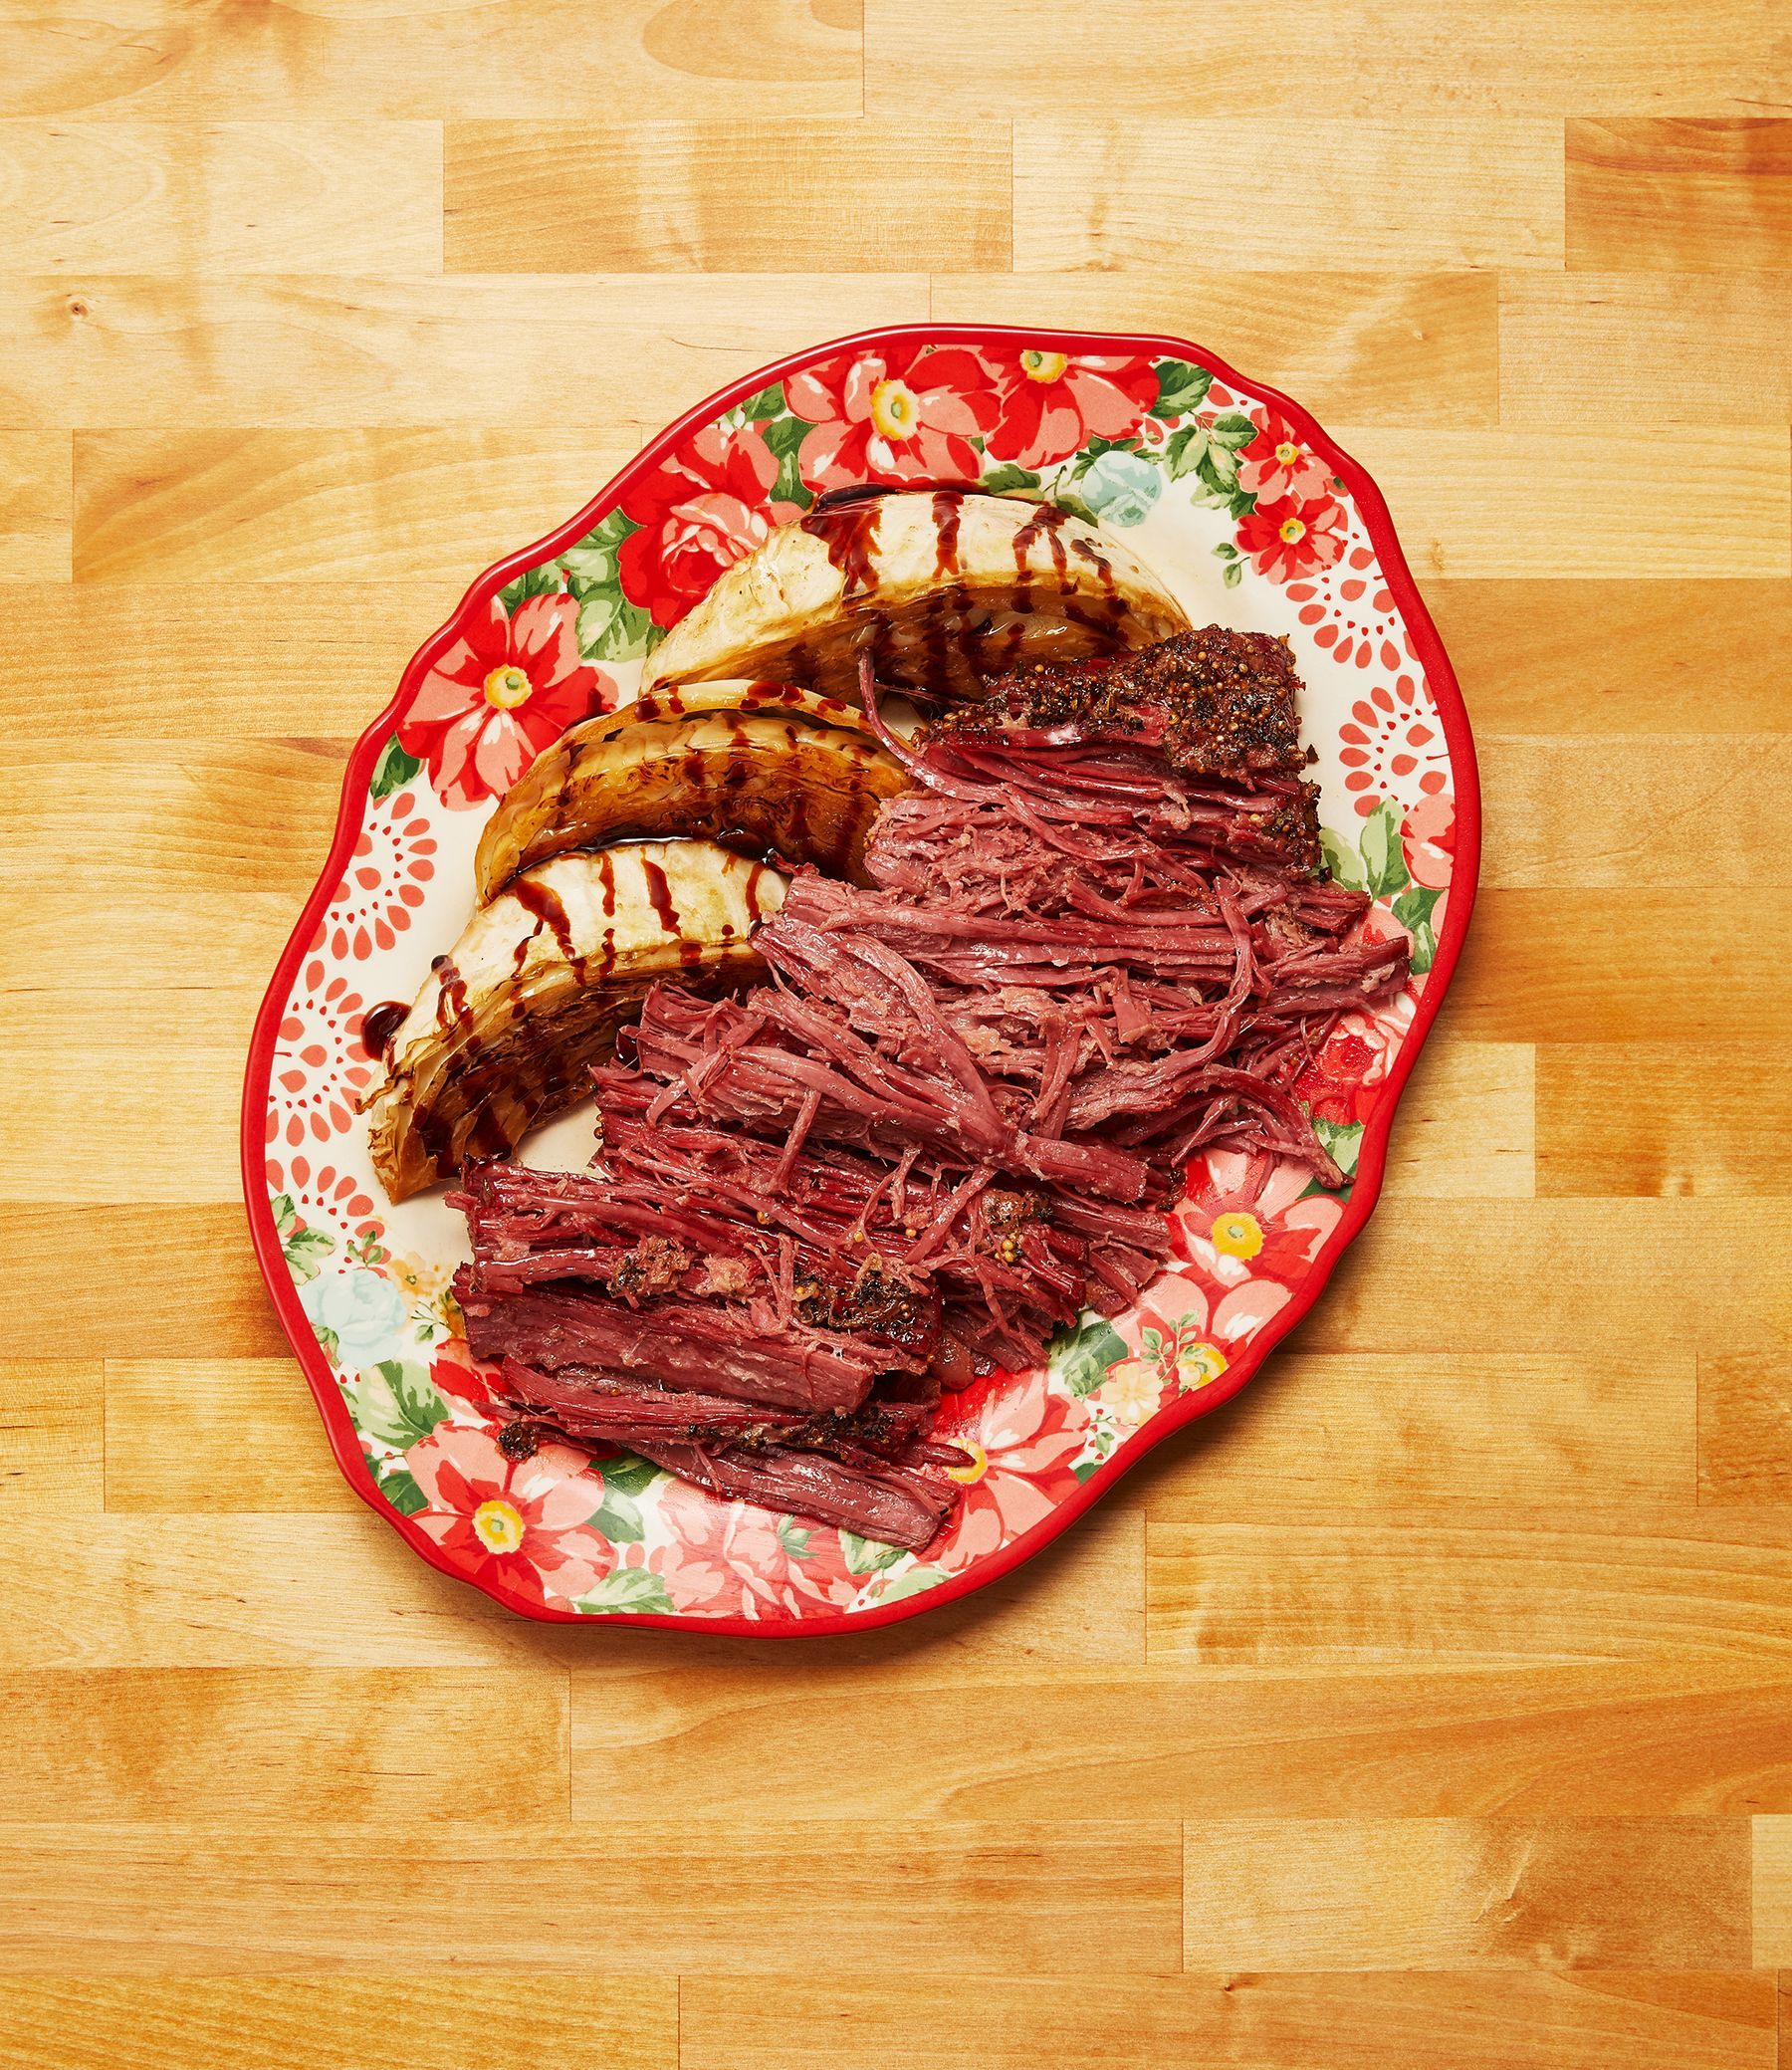 https://hips.hearstapps.com/hmg-prod/images/corned-beef-and-cabbage-recipe-6413a02f70470.jpeg